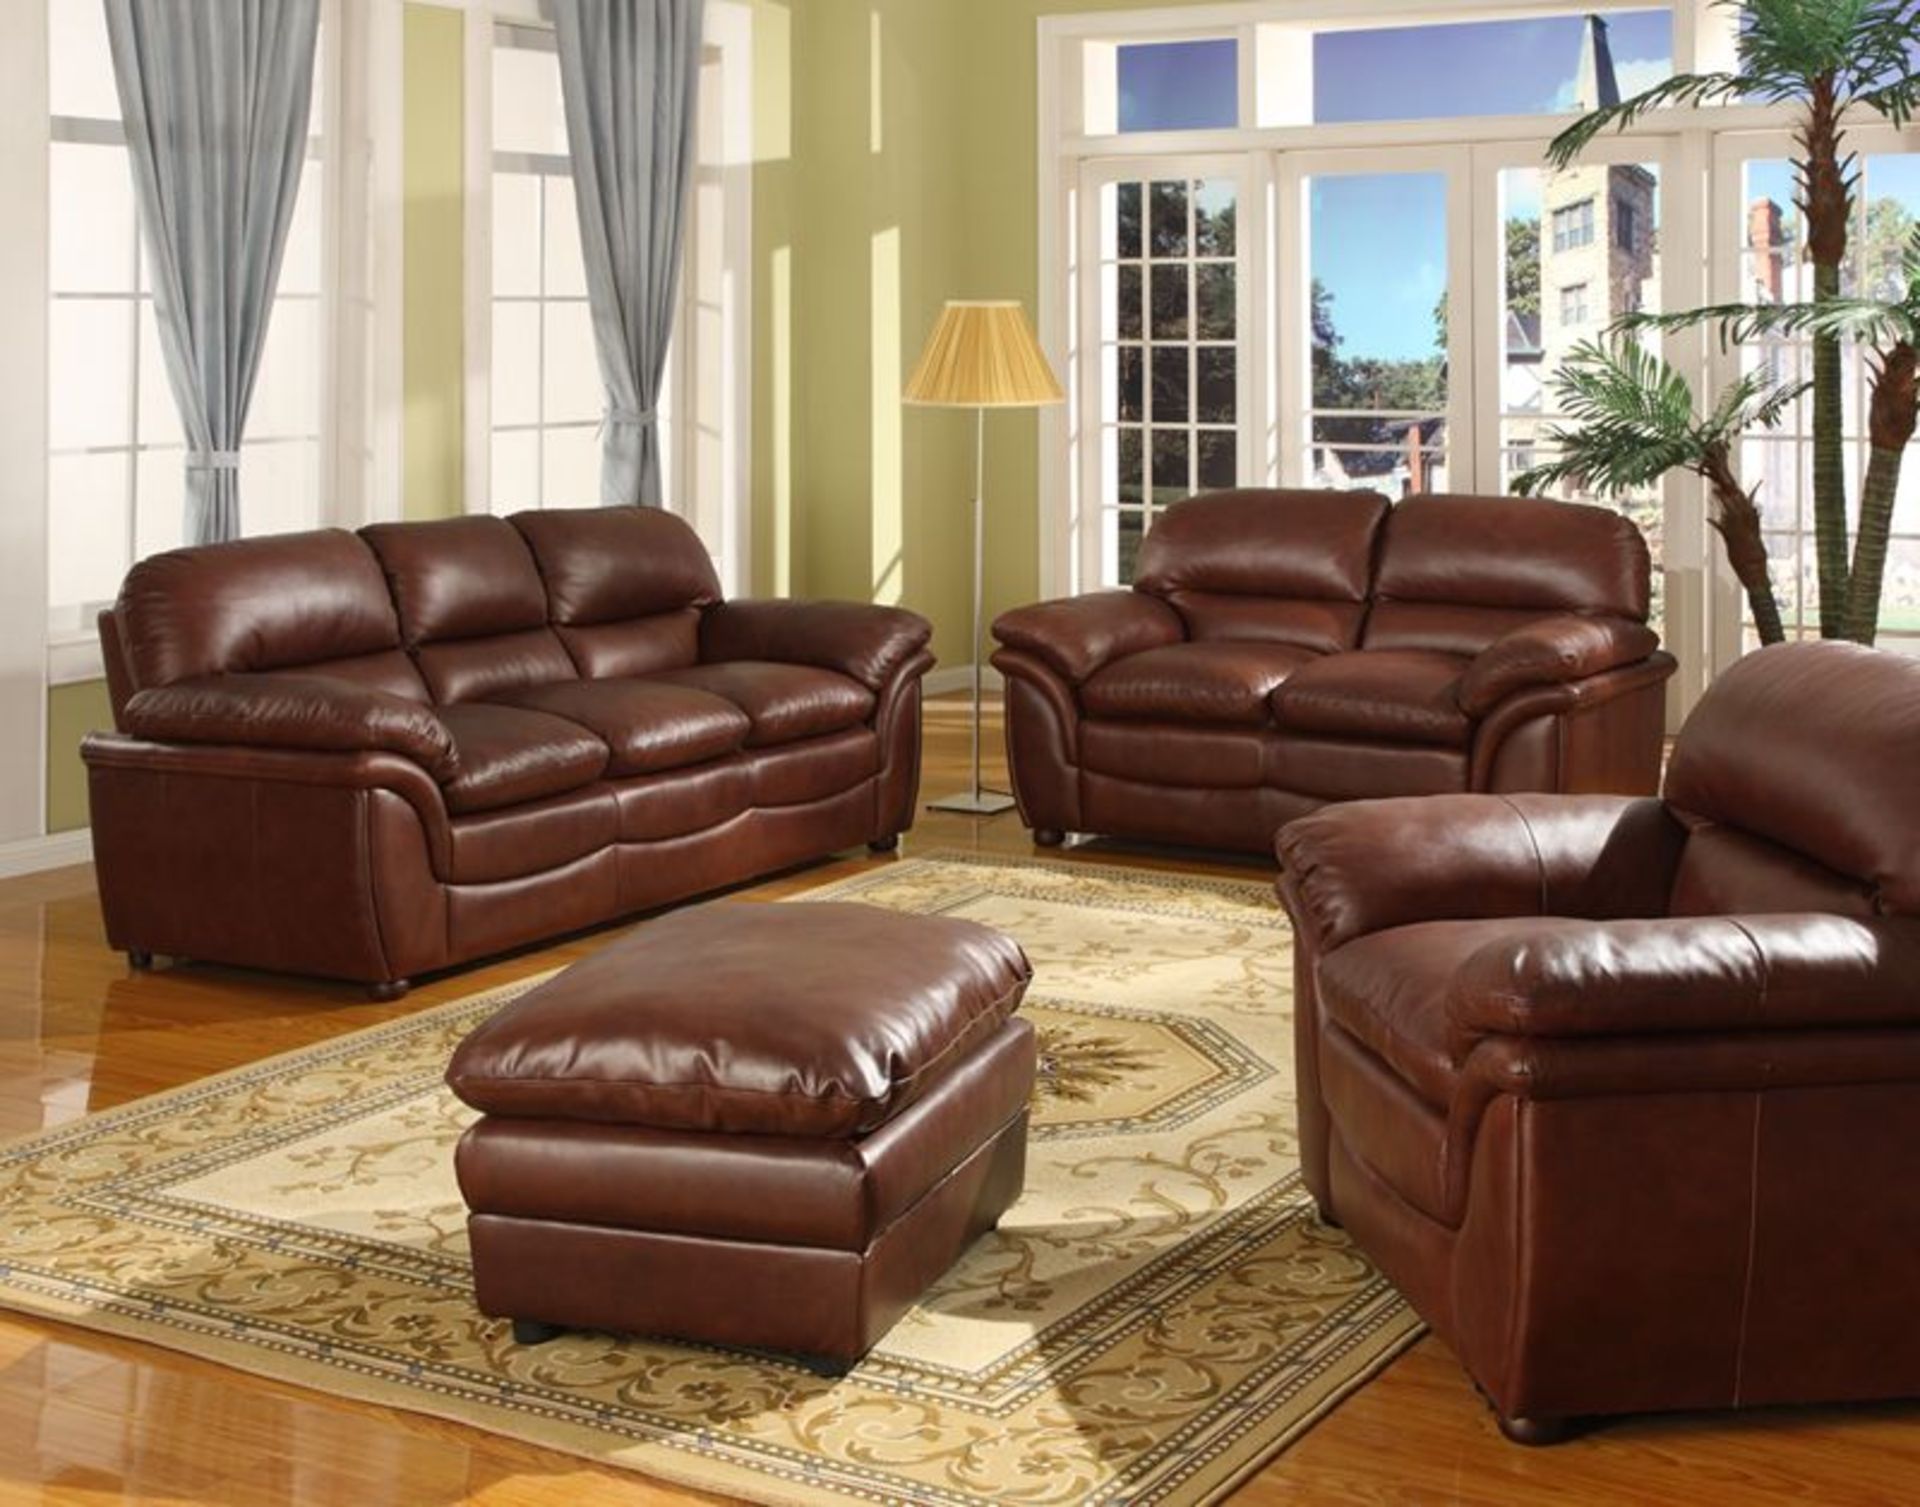 veronica 2 seater sofa in shiny brown leather plus 2 seater veronica sofa in shiny brown leather